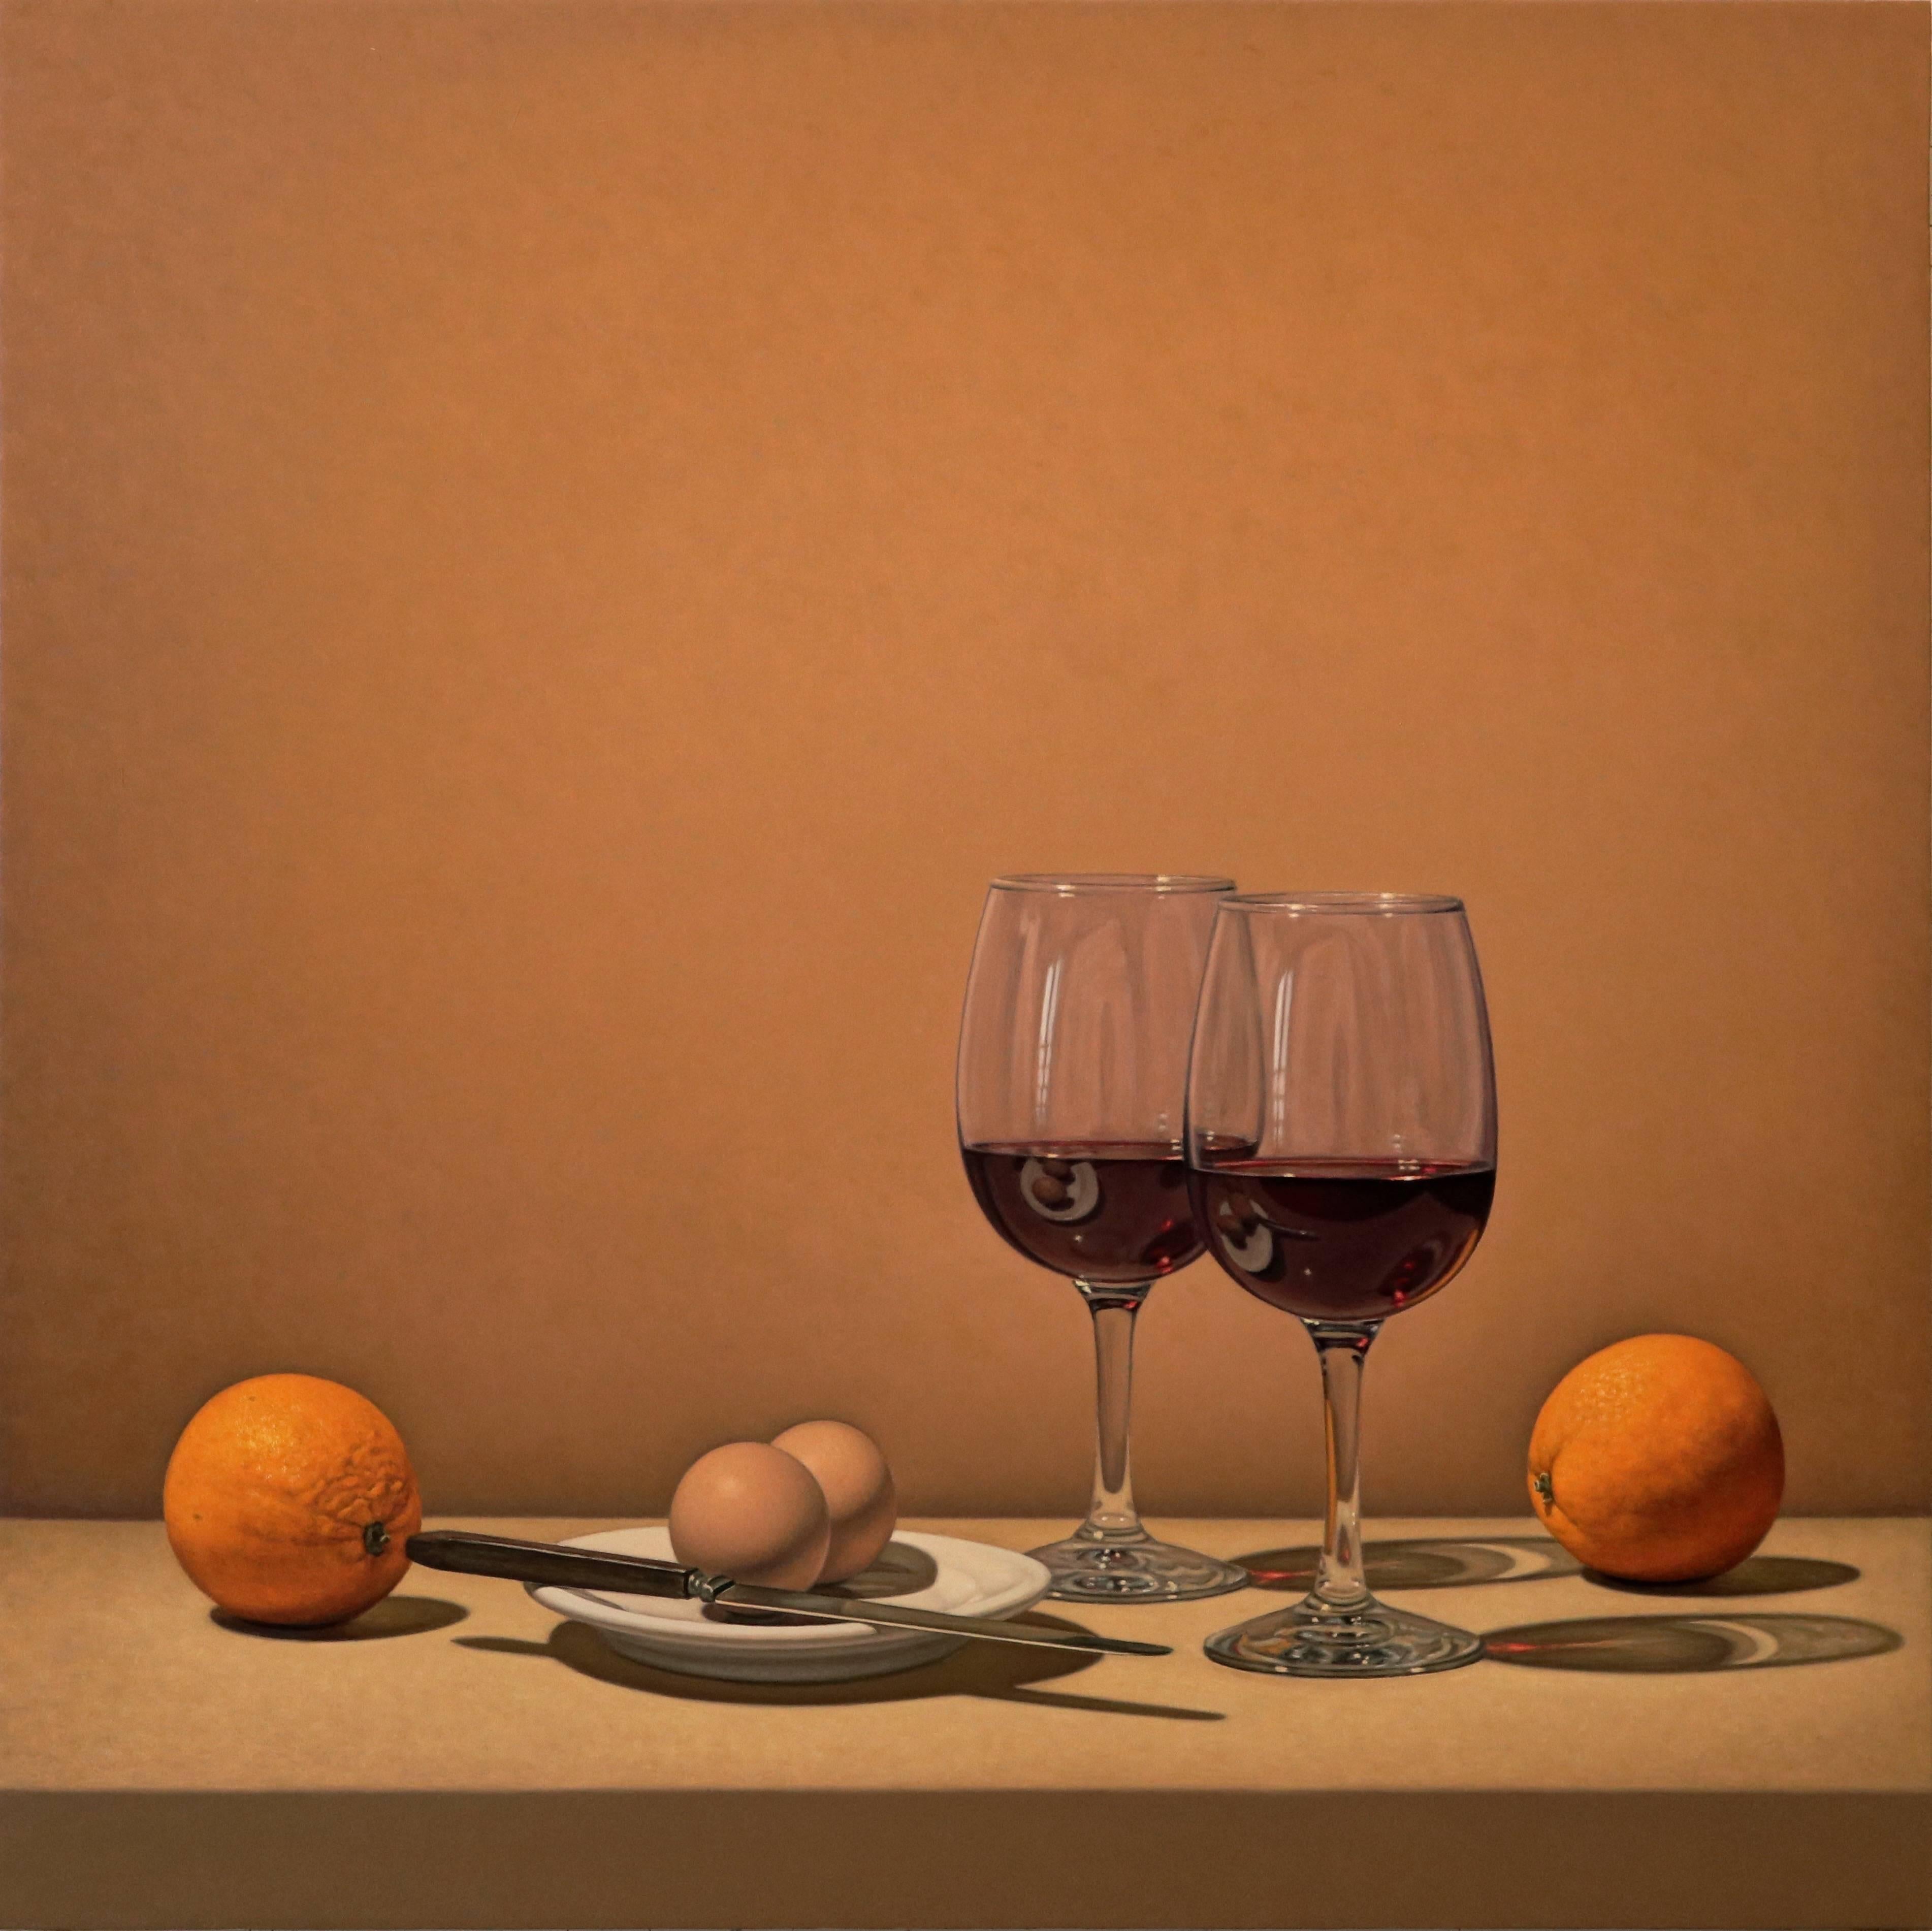 Eggs, Wine, and Oranges - Painting by Tom Gregg